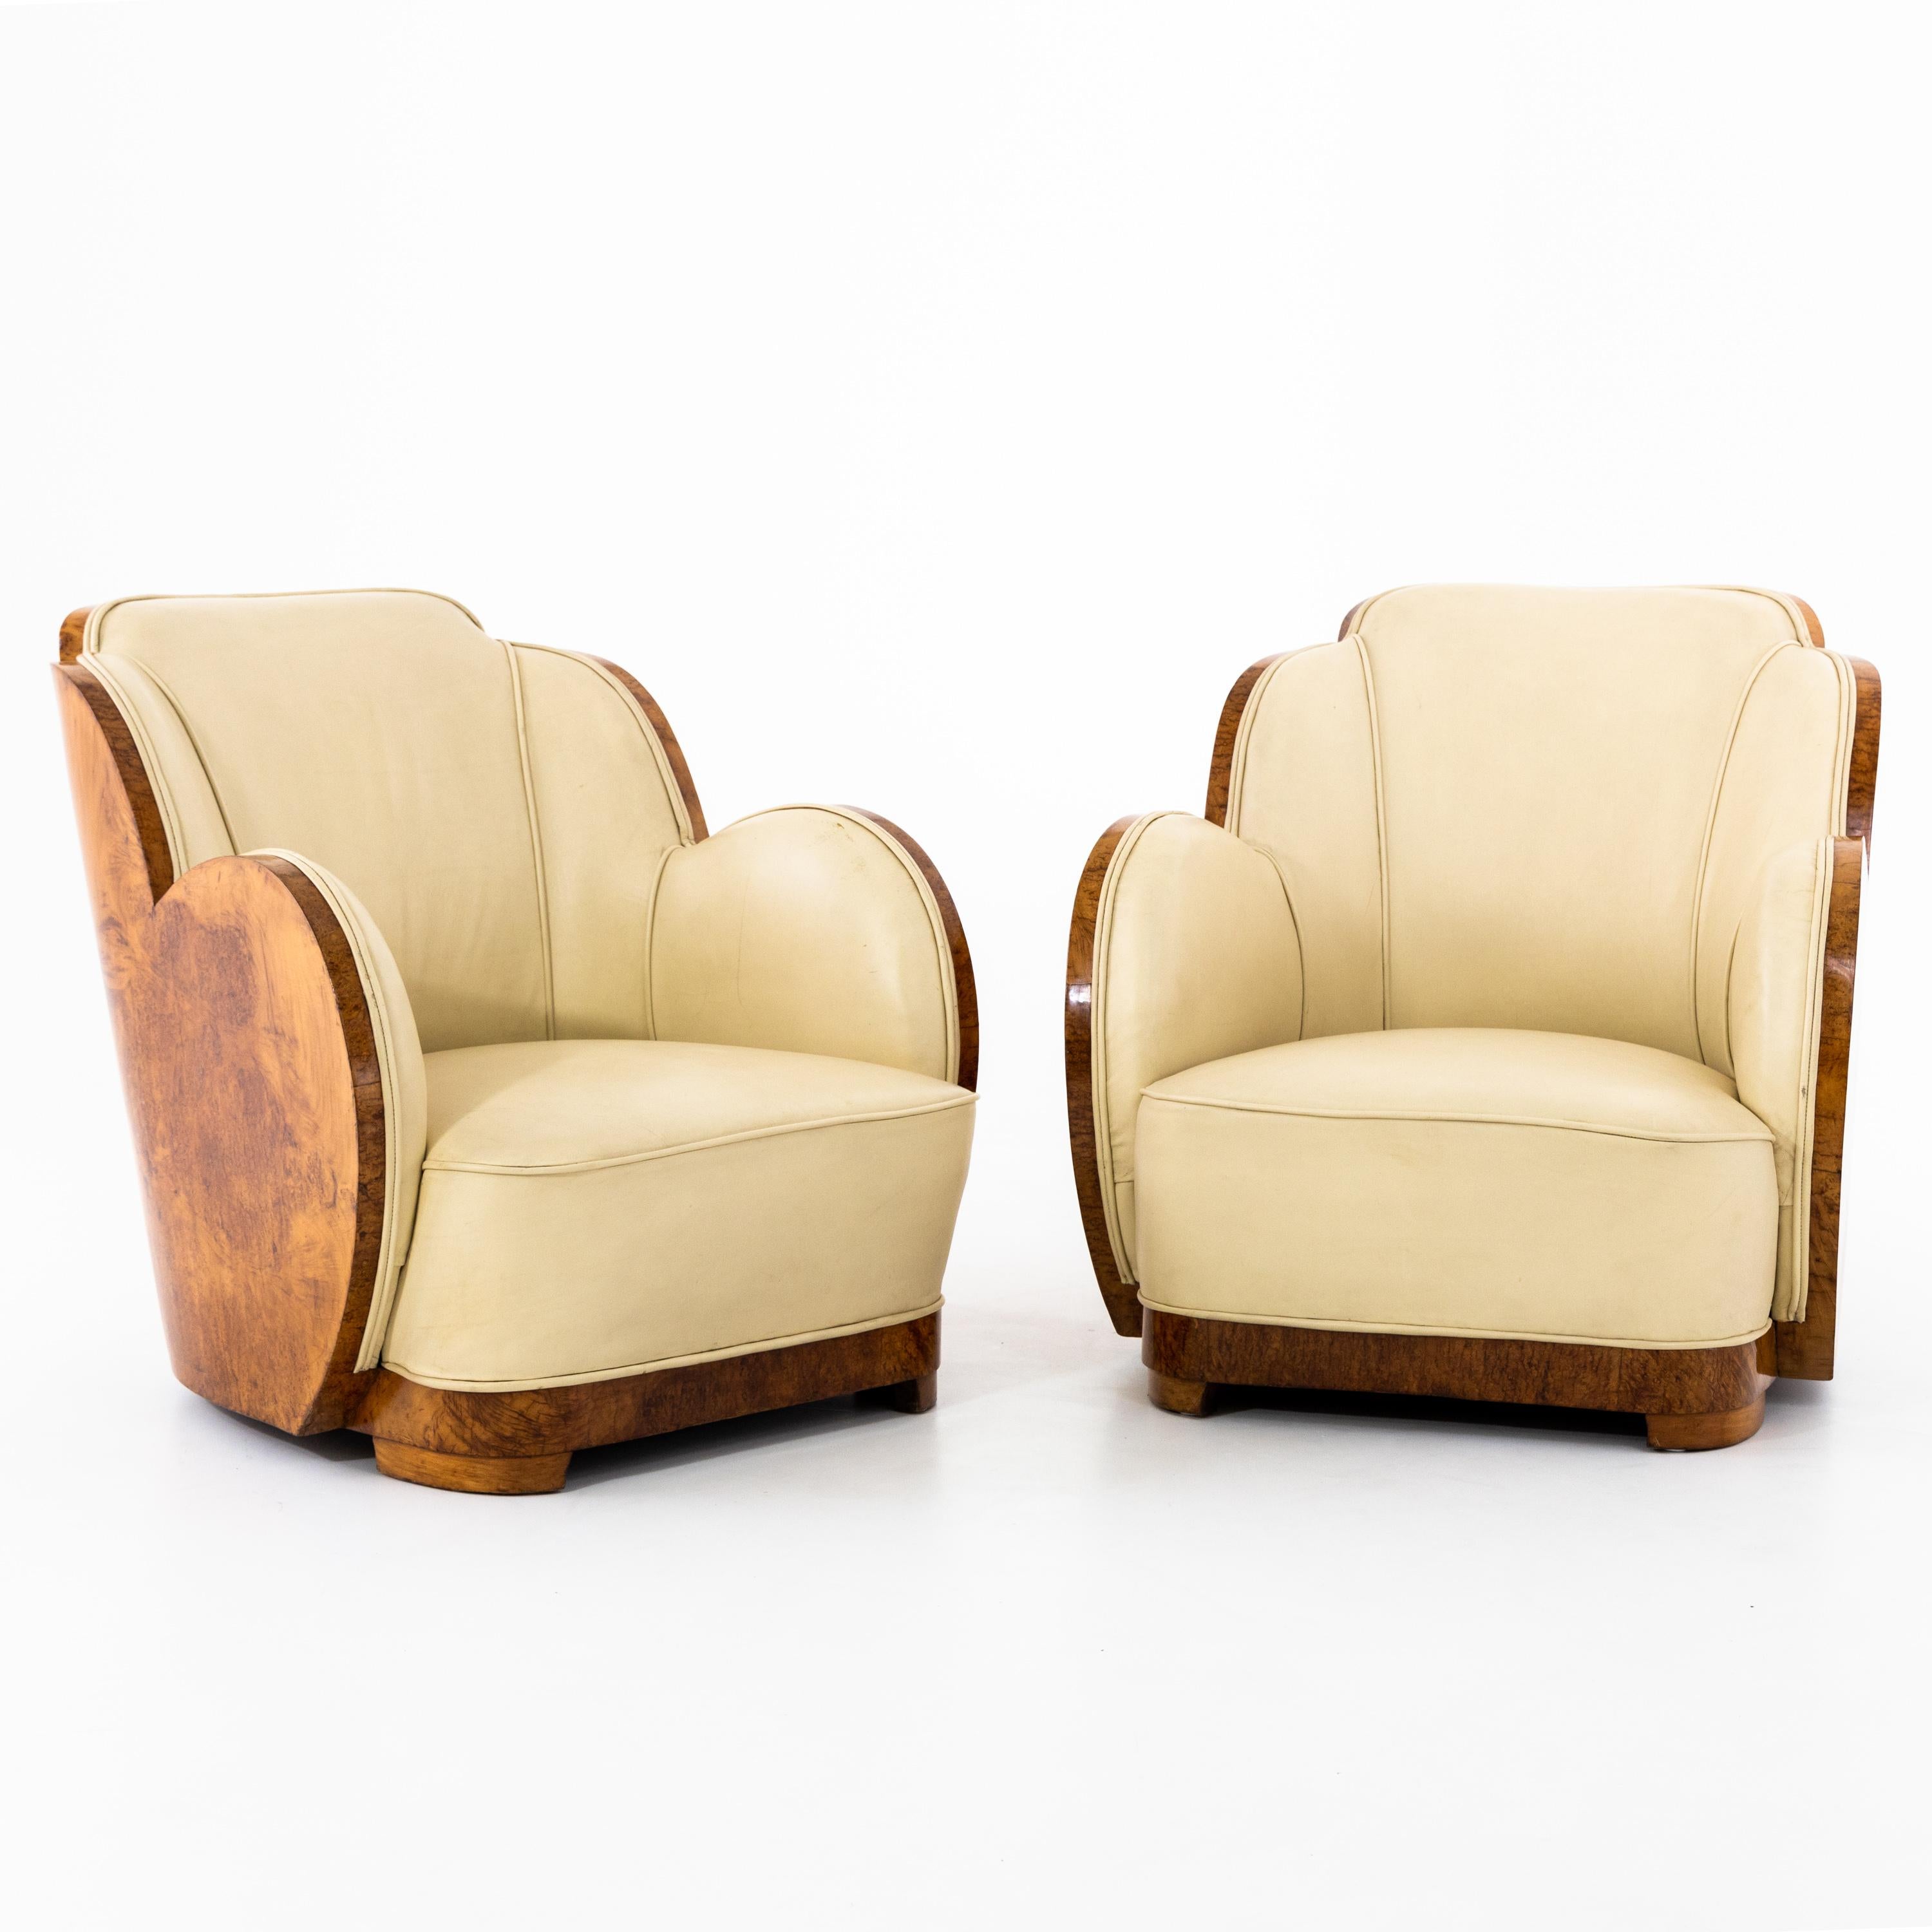 Pair of Art Deco cloud chairs with beautiful scalloped seats, covered in beige leather.